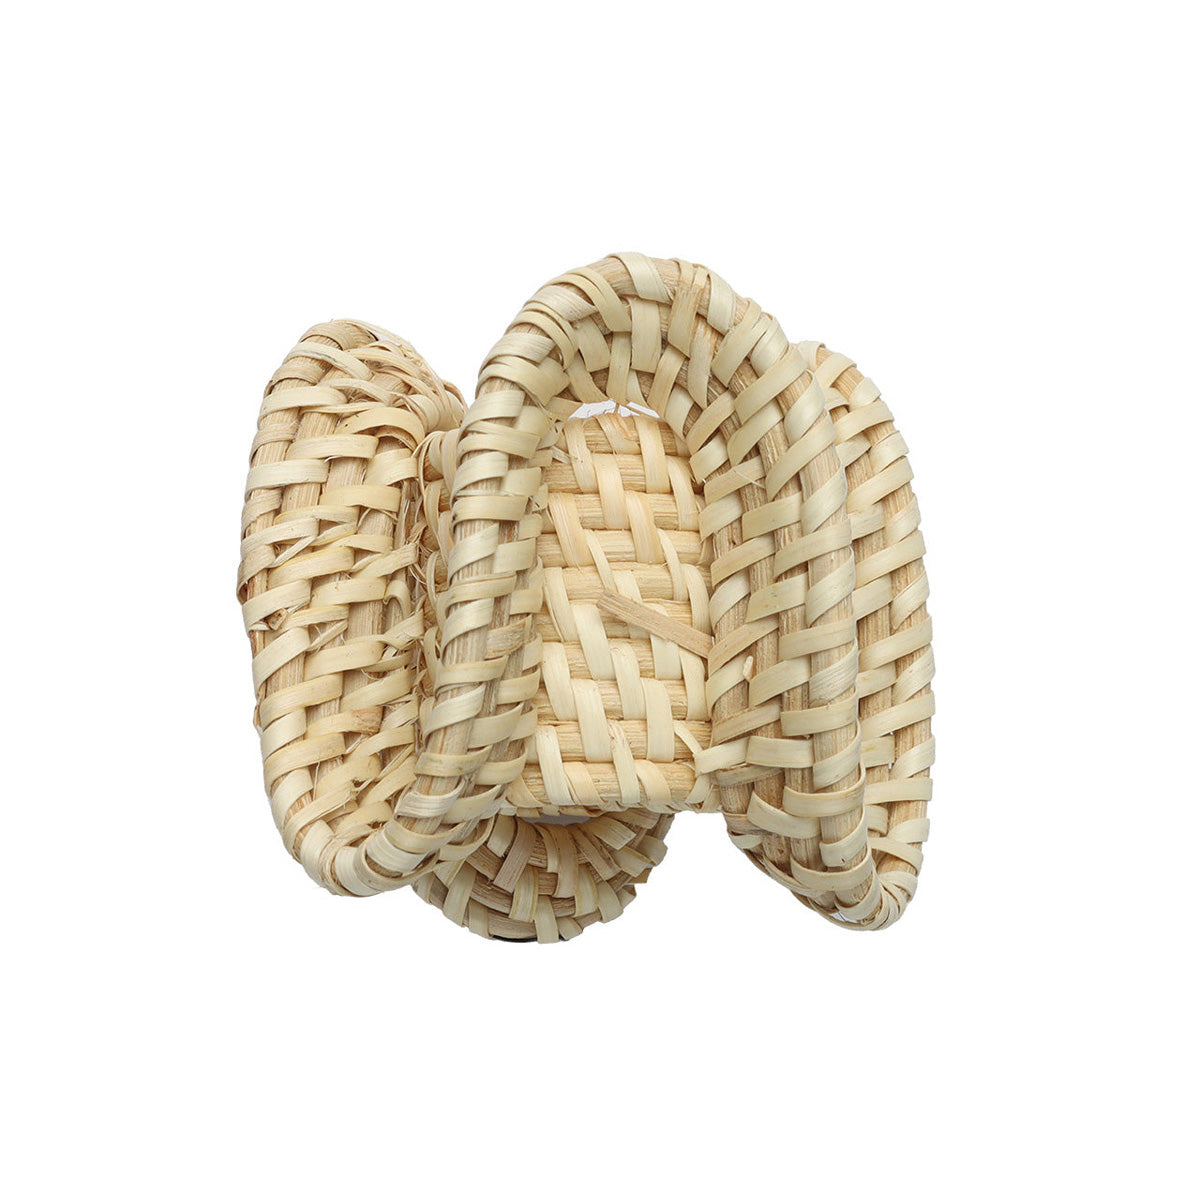 Ruffle Napkin Ring in Natural - Set of 4 by Kim Seybert Additional Image-2